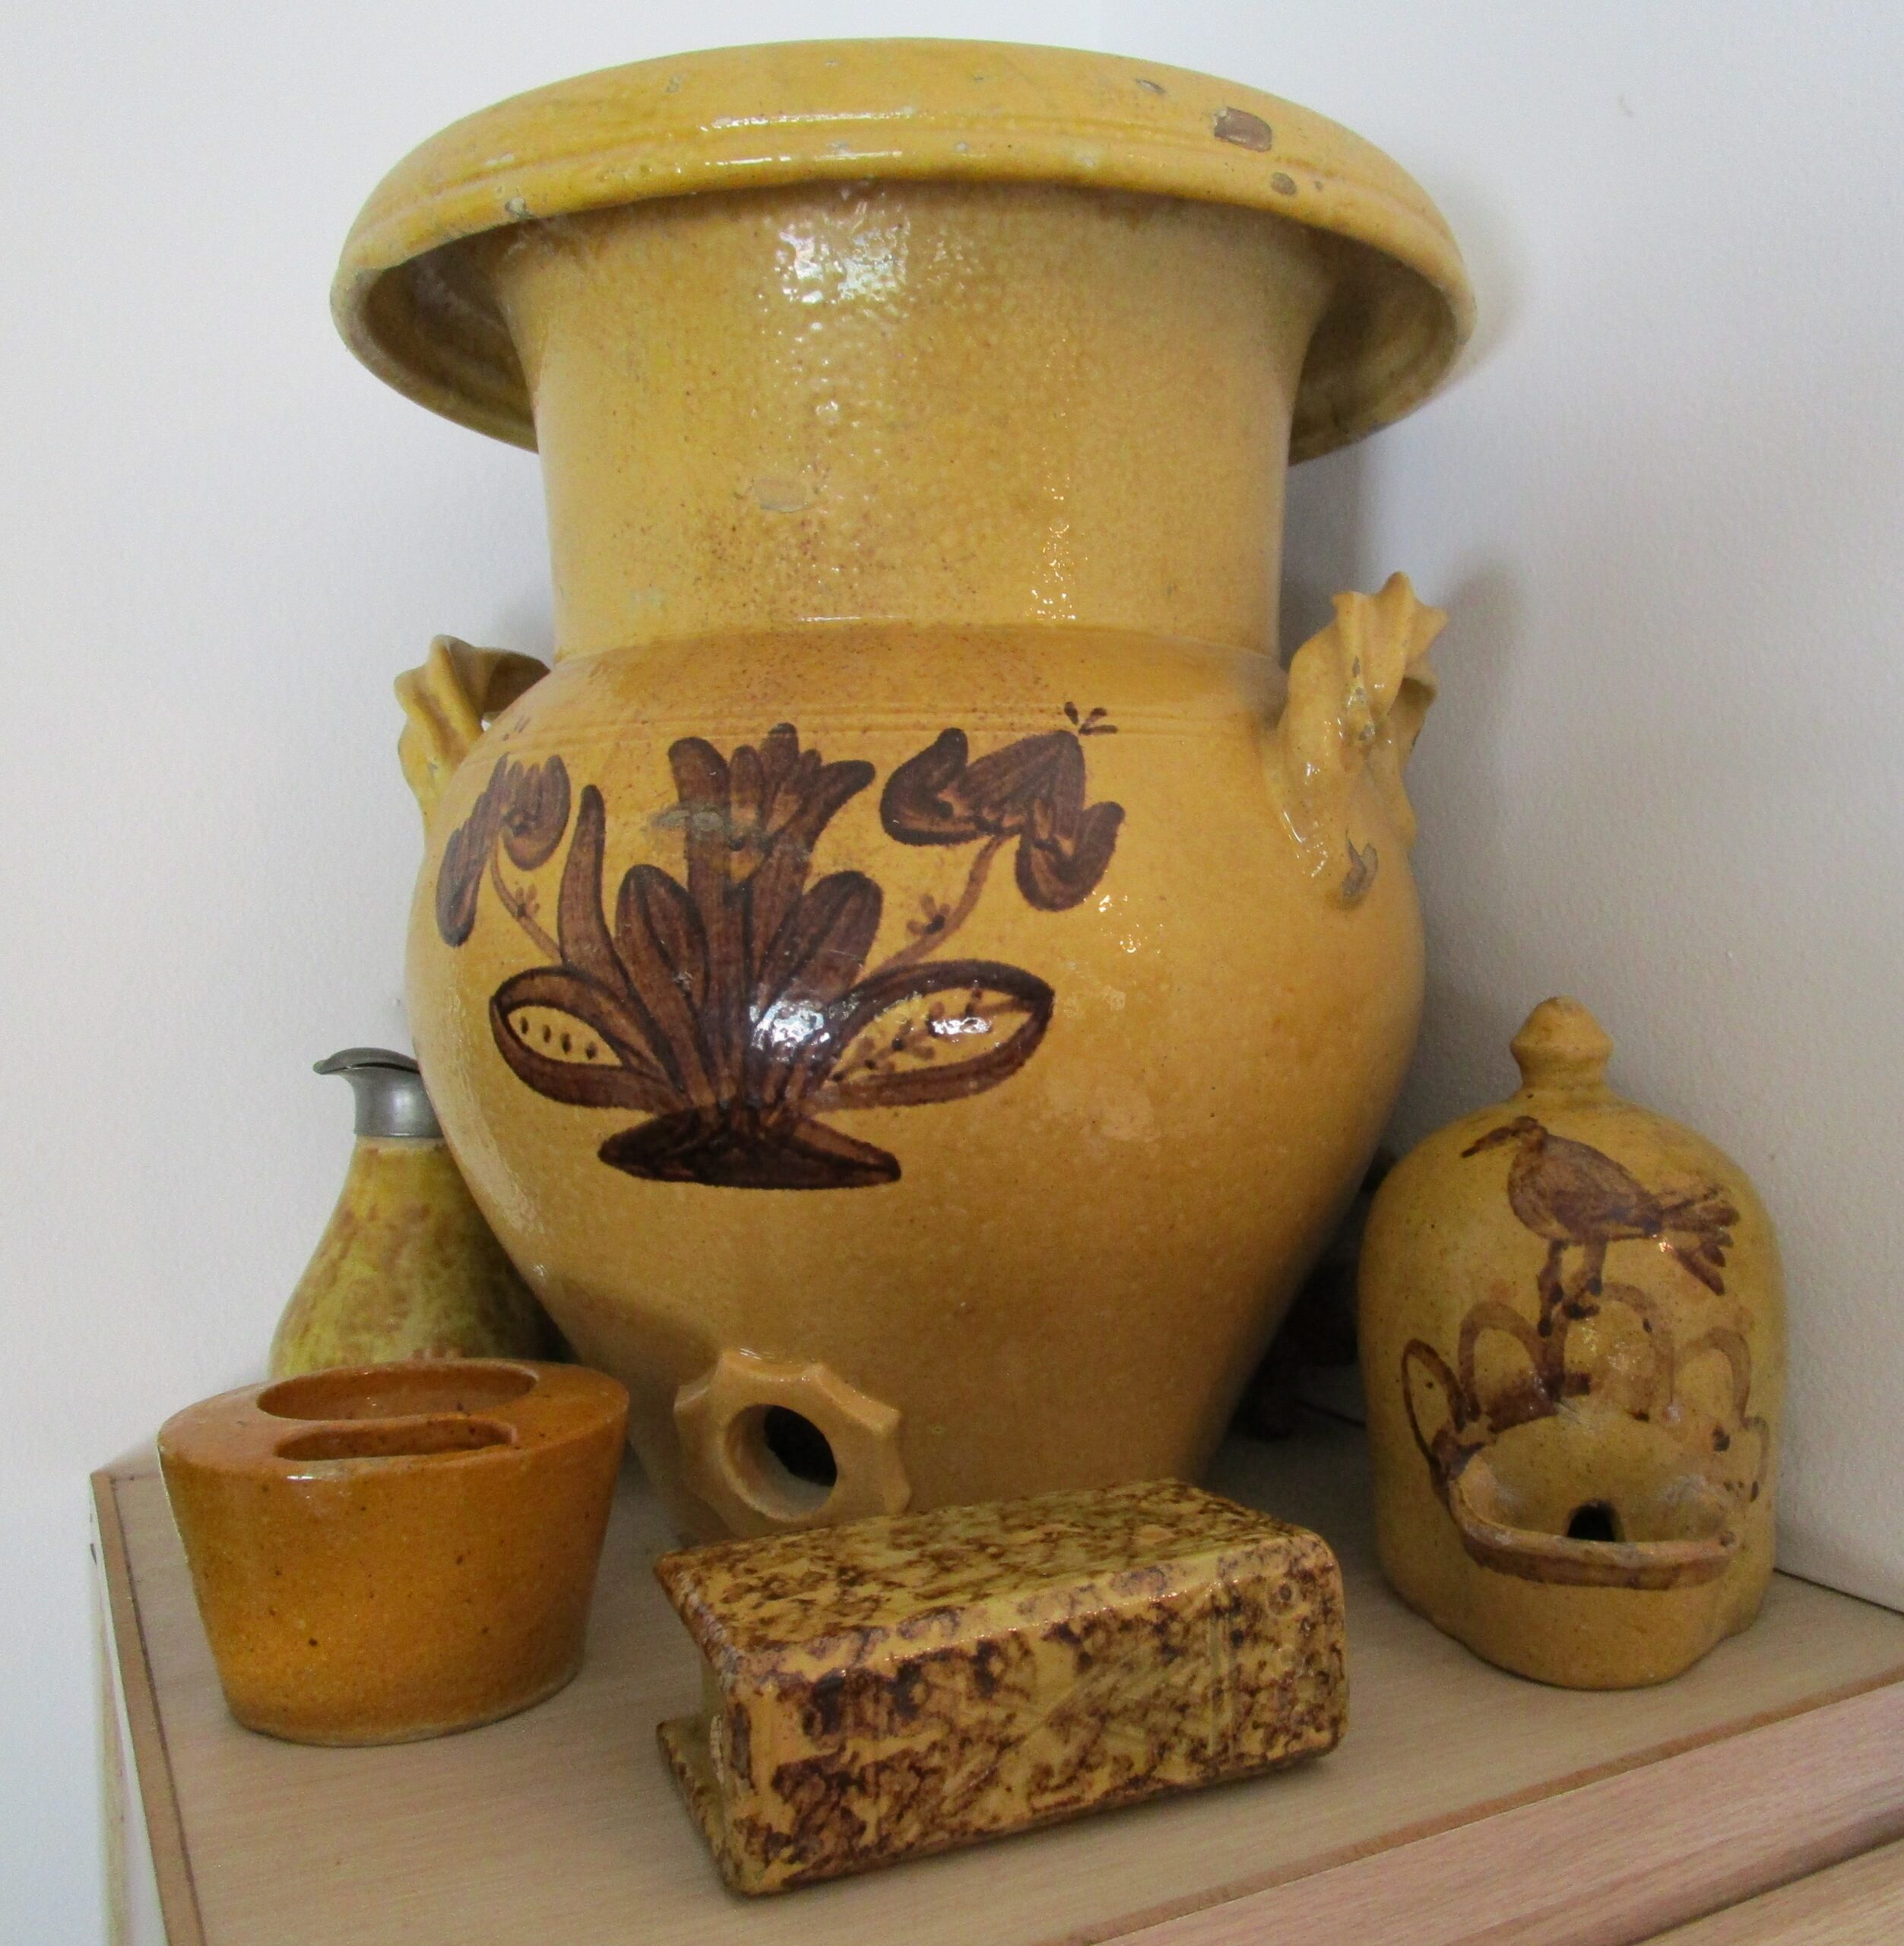 Water cooler, bird waterer, shaving mug, syrup pitcher, and book bottle. These pieces were originally collected in the 1940's by Whitewater resident Joseph Thiele. Private collection.